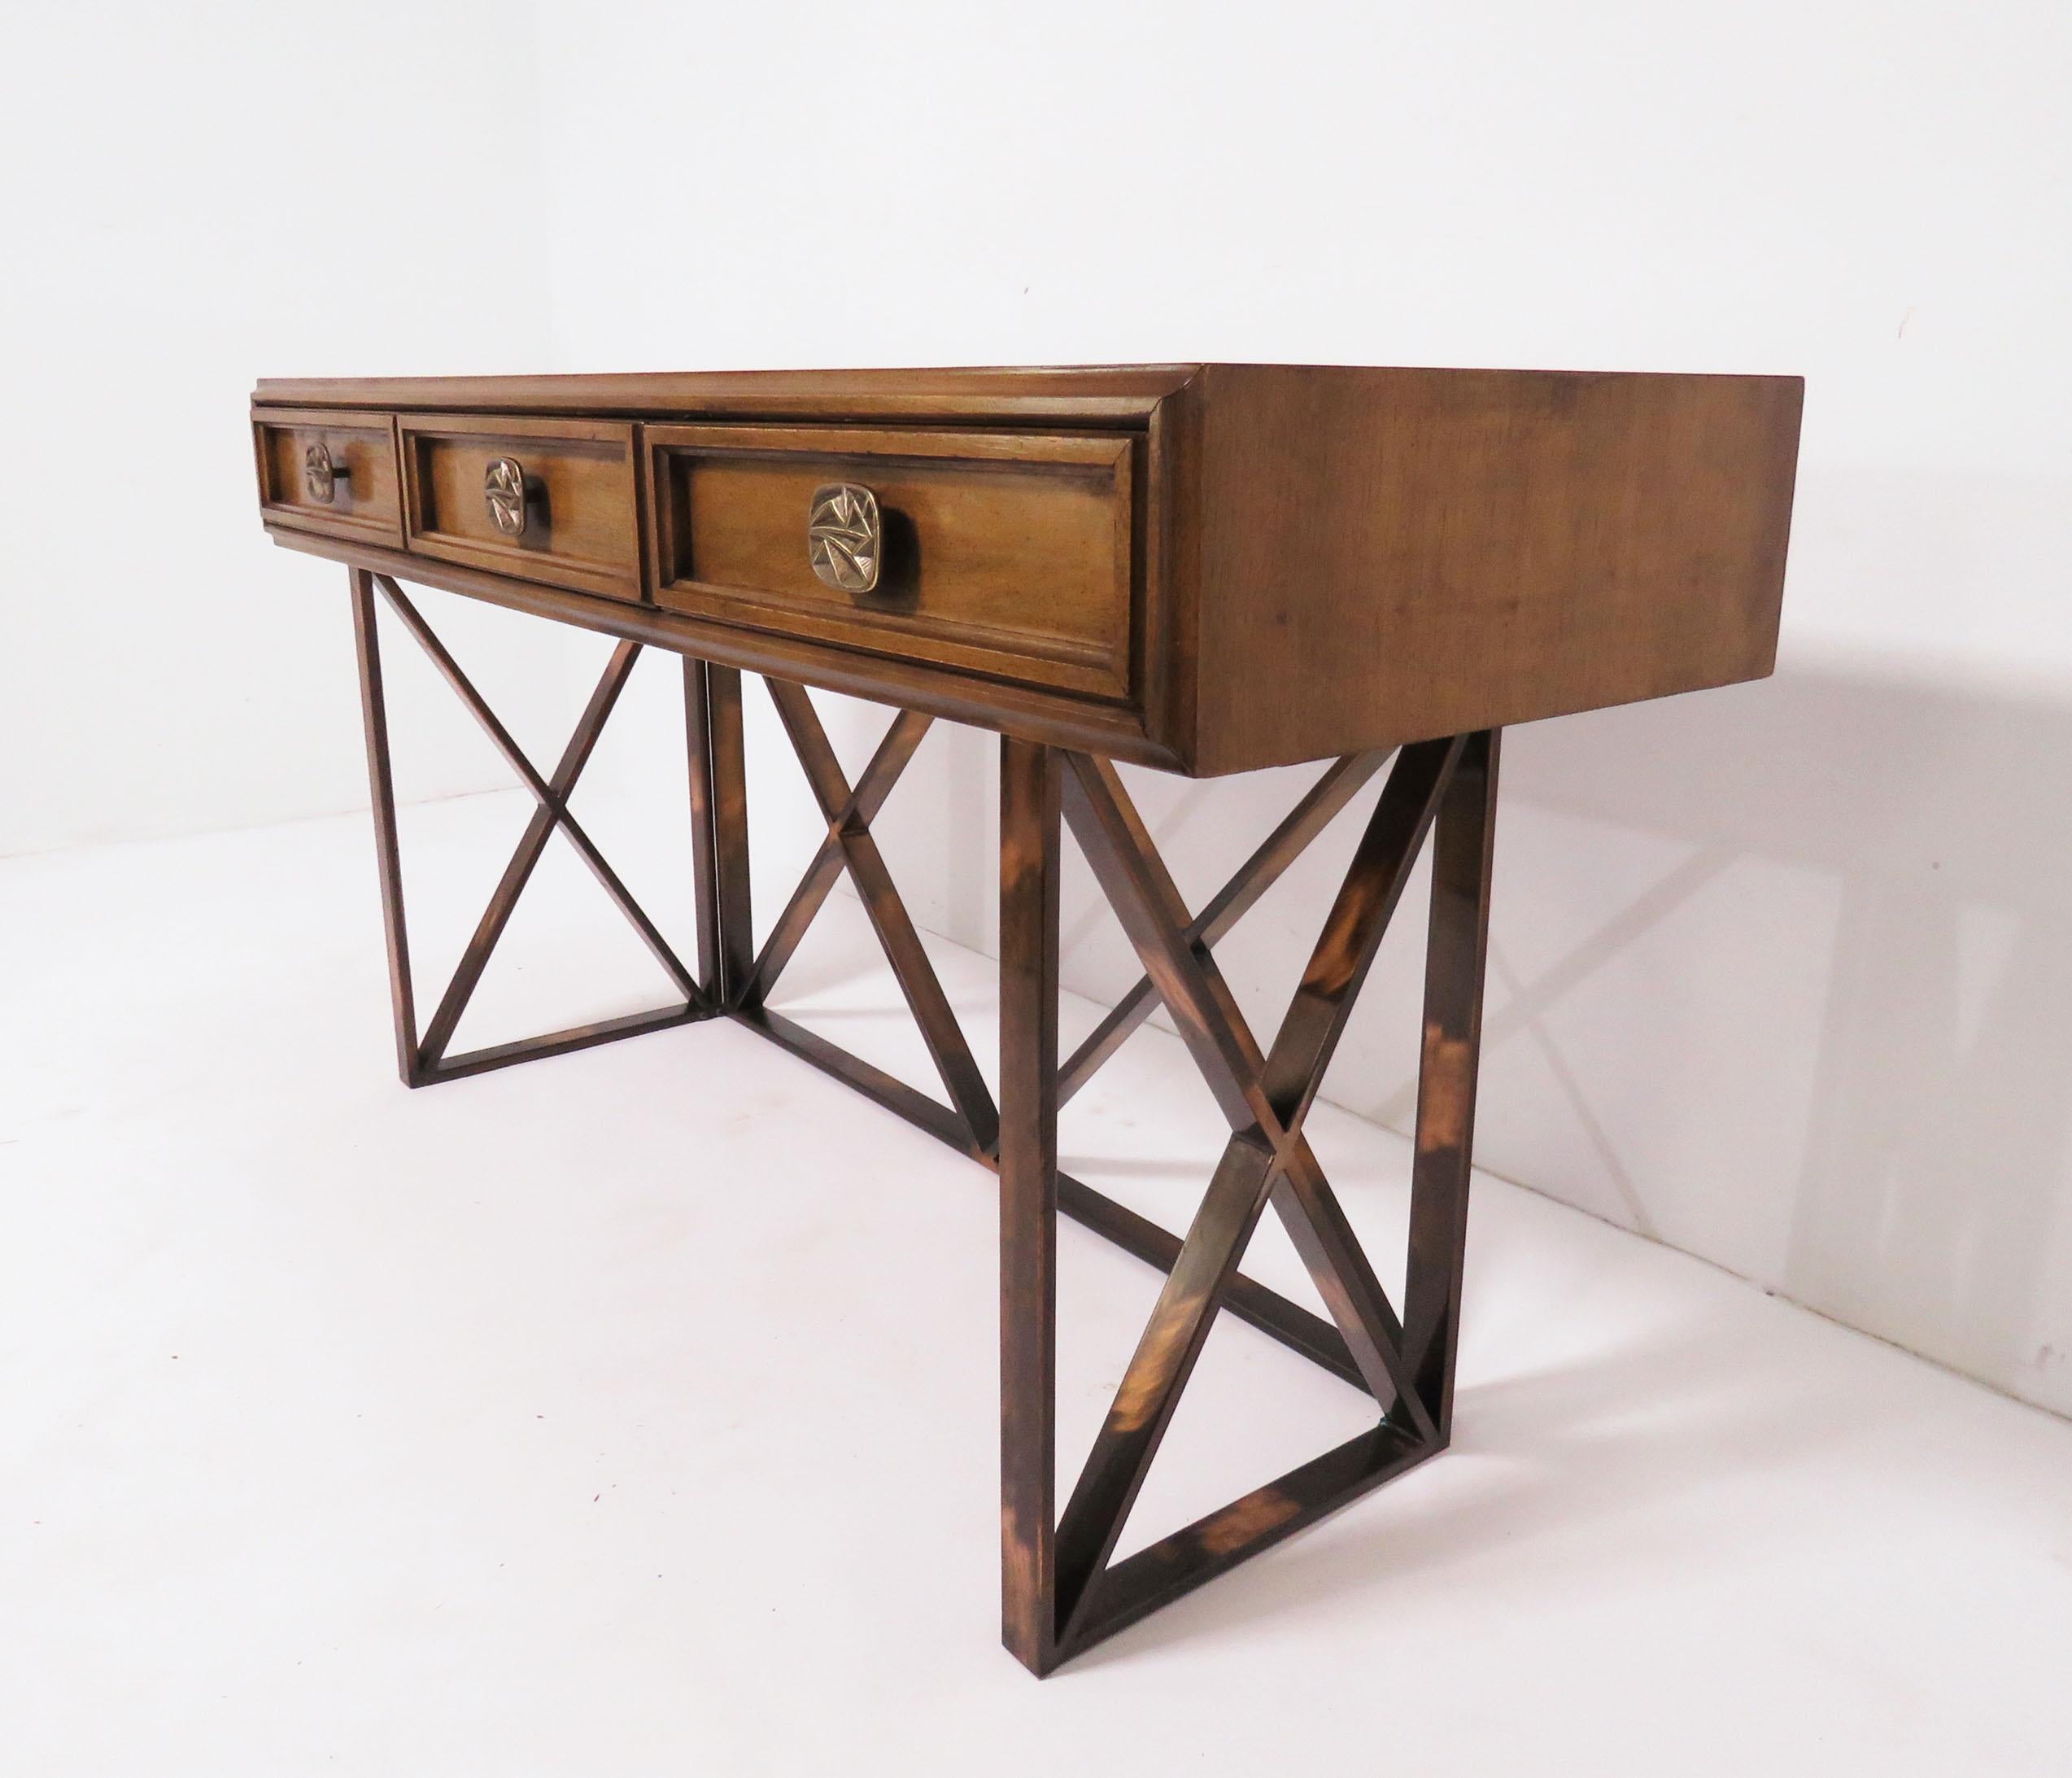 Mid-Century Modern Midcentury Walnut Console or Writing Table with X-Form Bronzed Base, circa 1970s